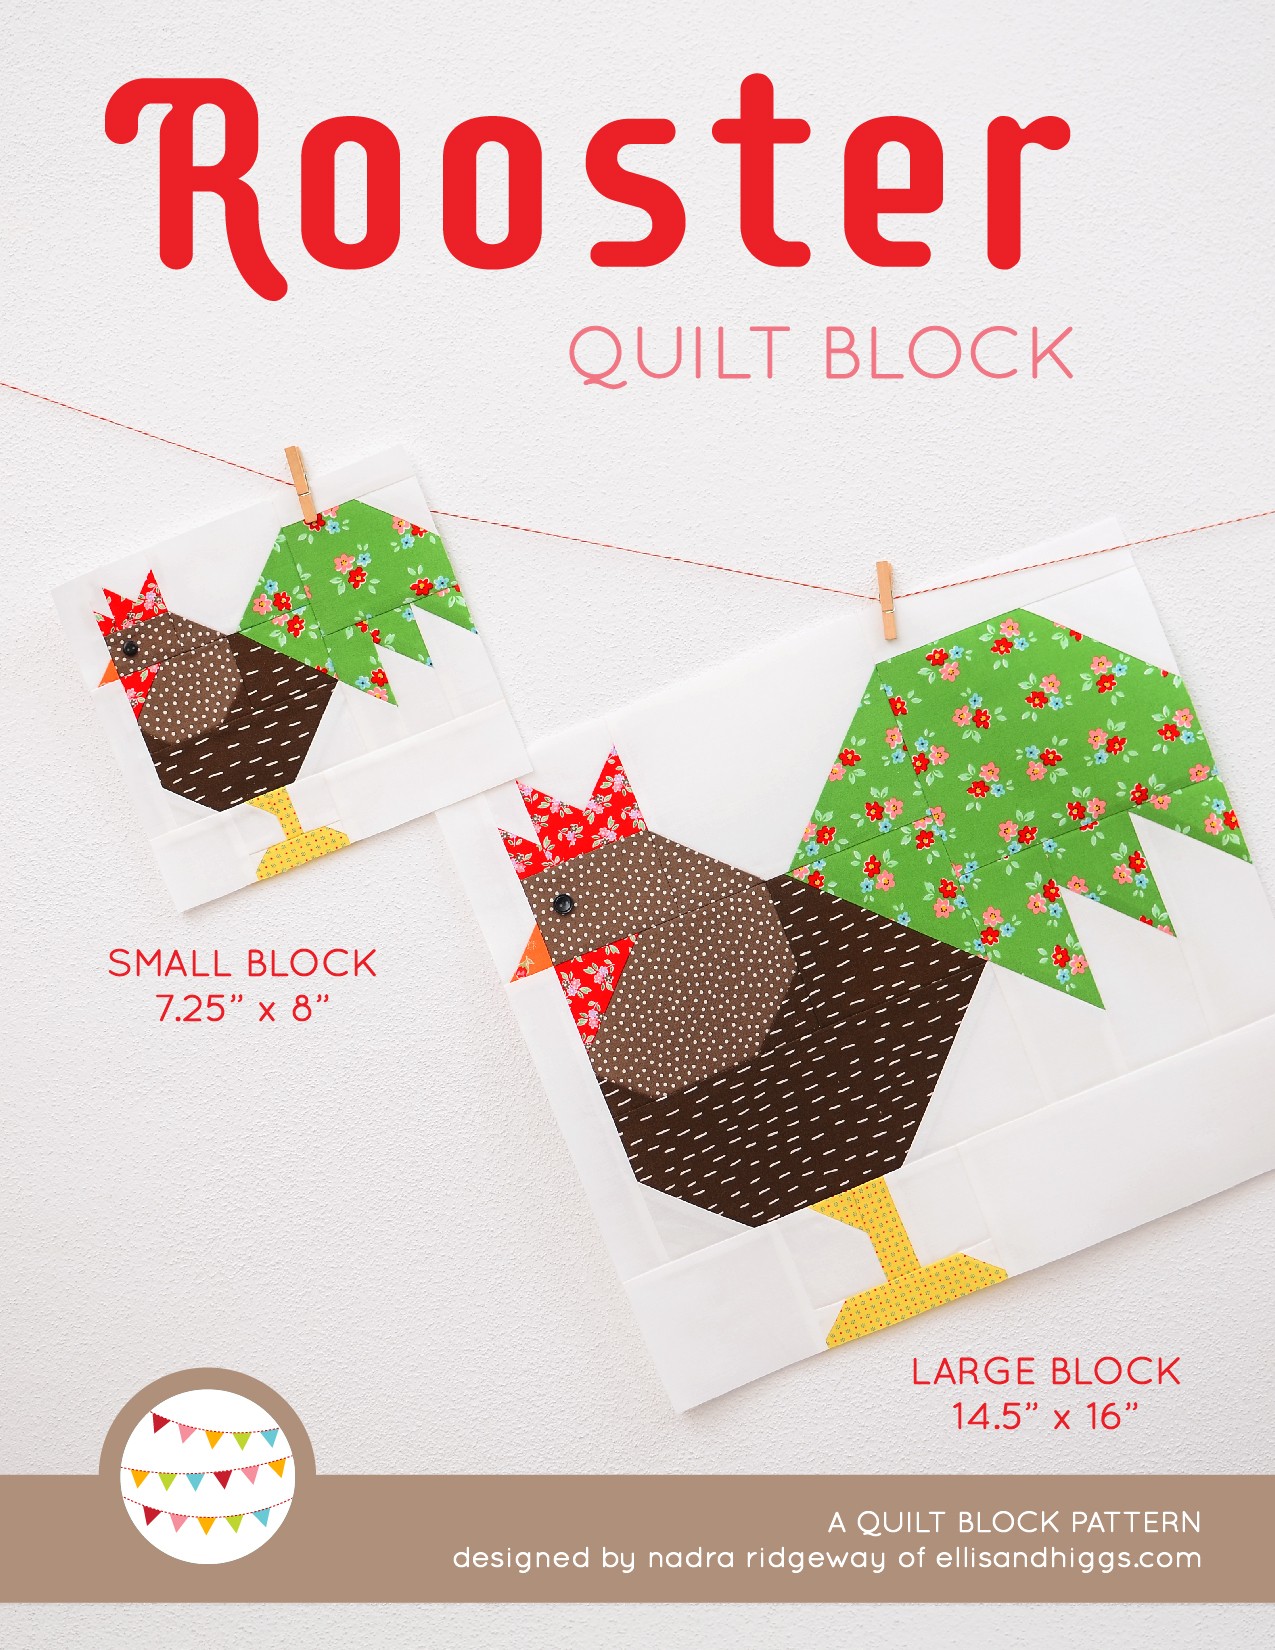 Rooster quilt block in two sizes hanging on a wall